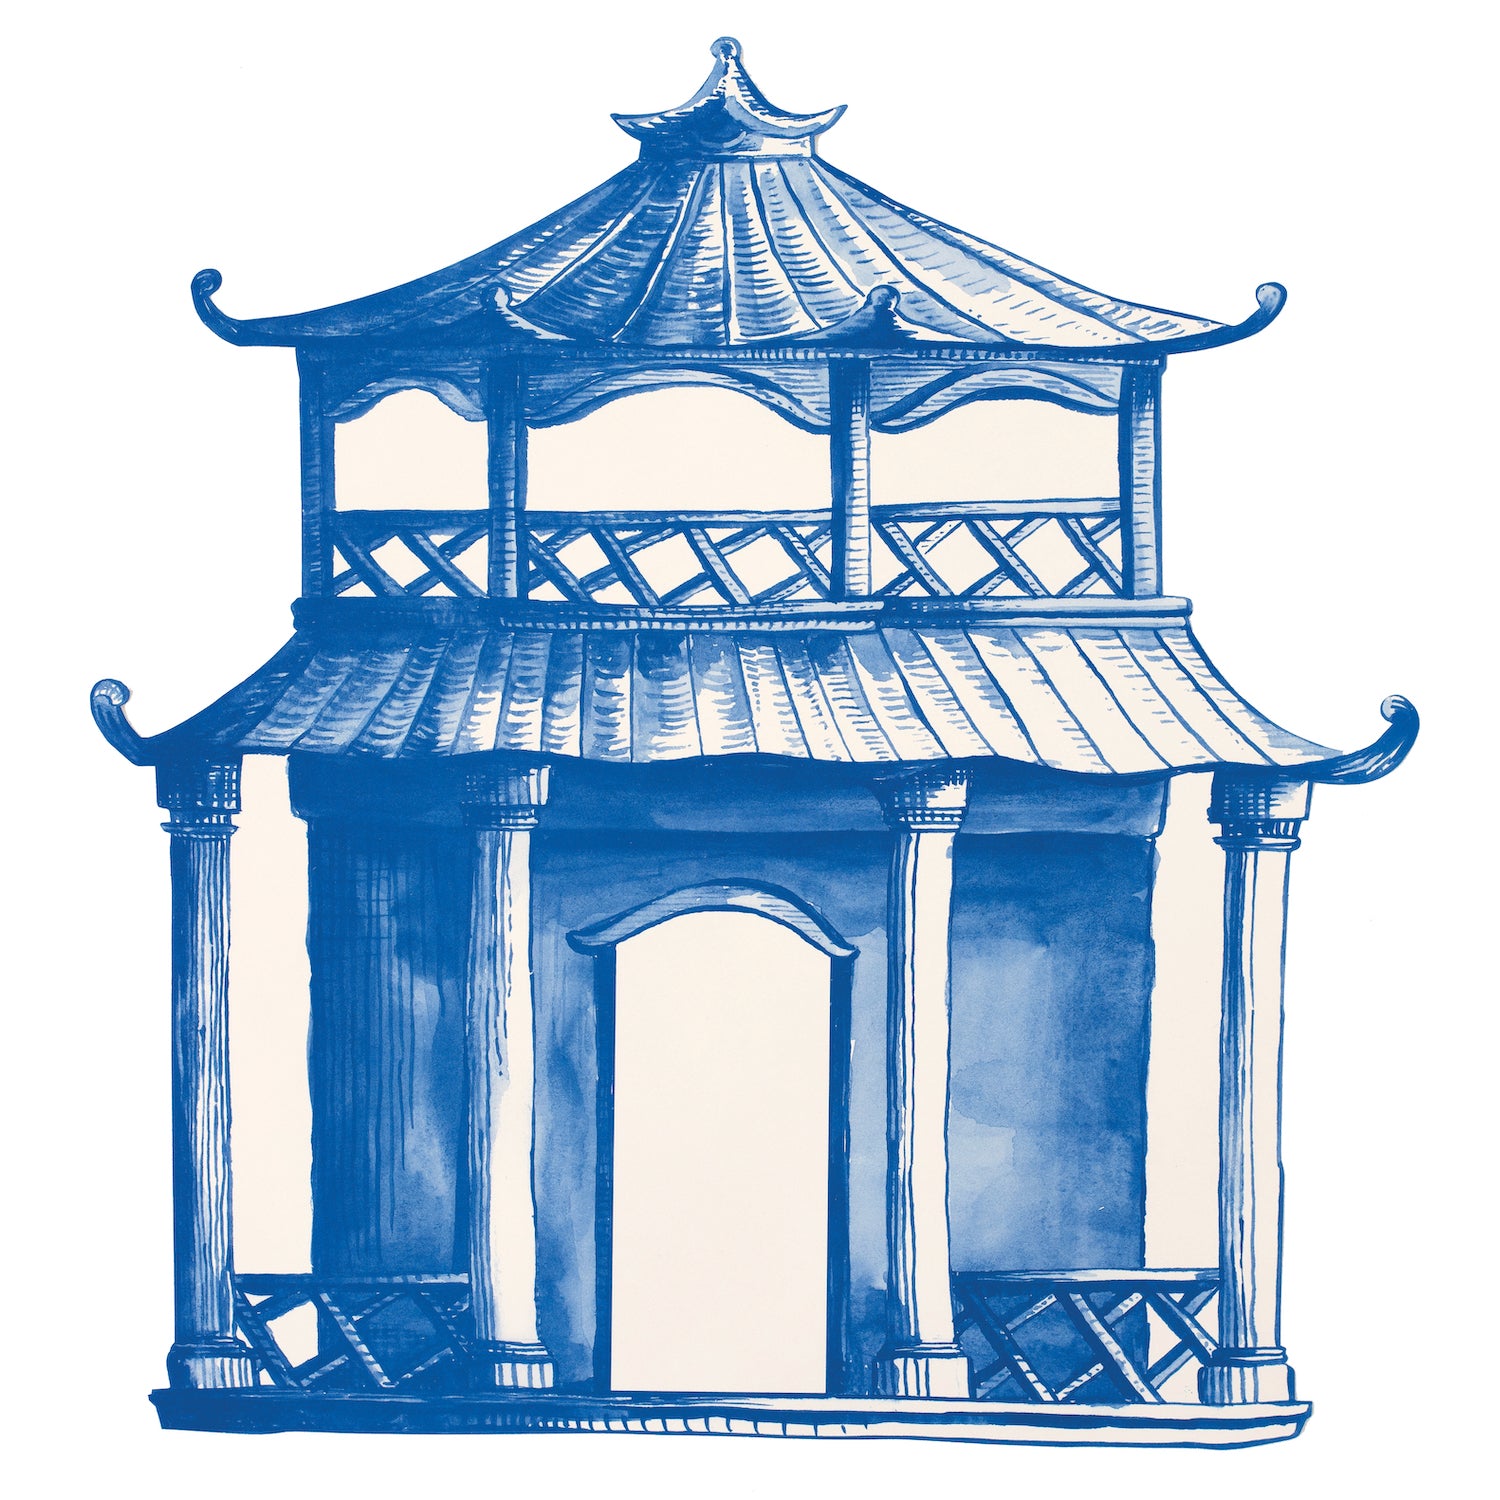 An elegant blue drawing of a Die-cut Pagoda Placemat enhanced with an artistic touch, by Hester &amp; Cook.